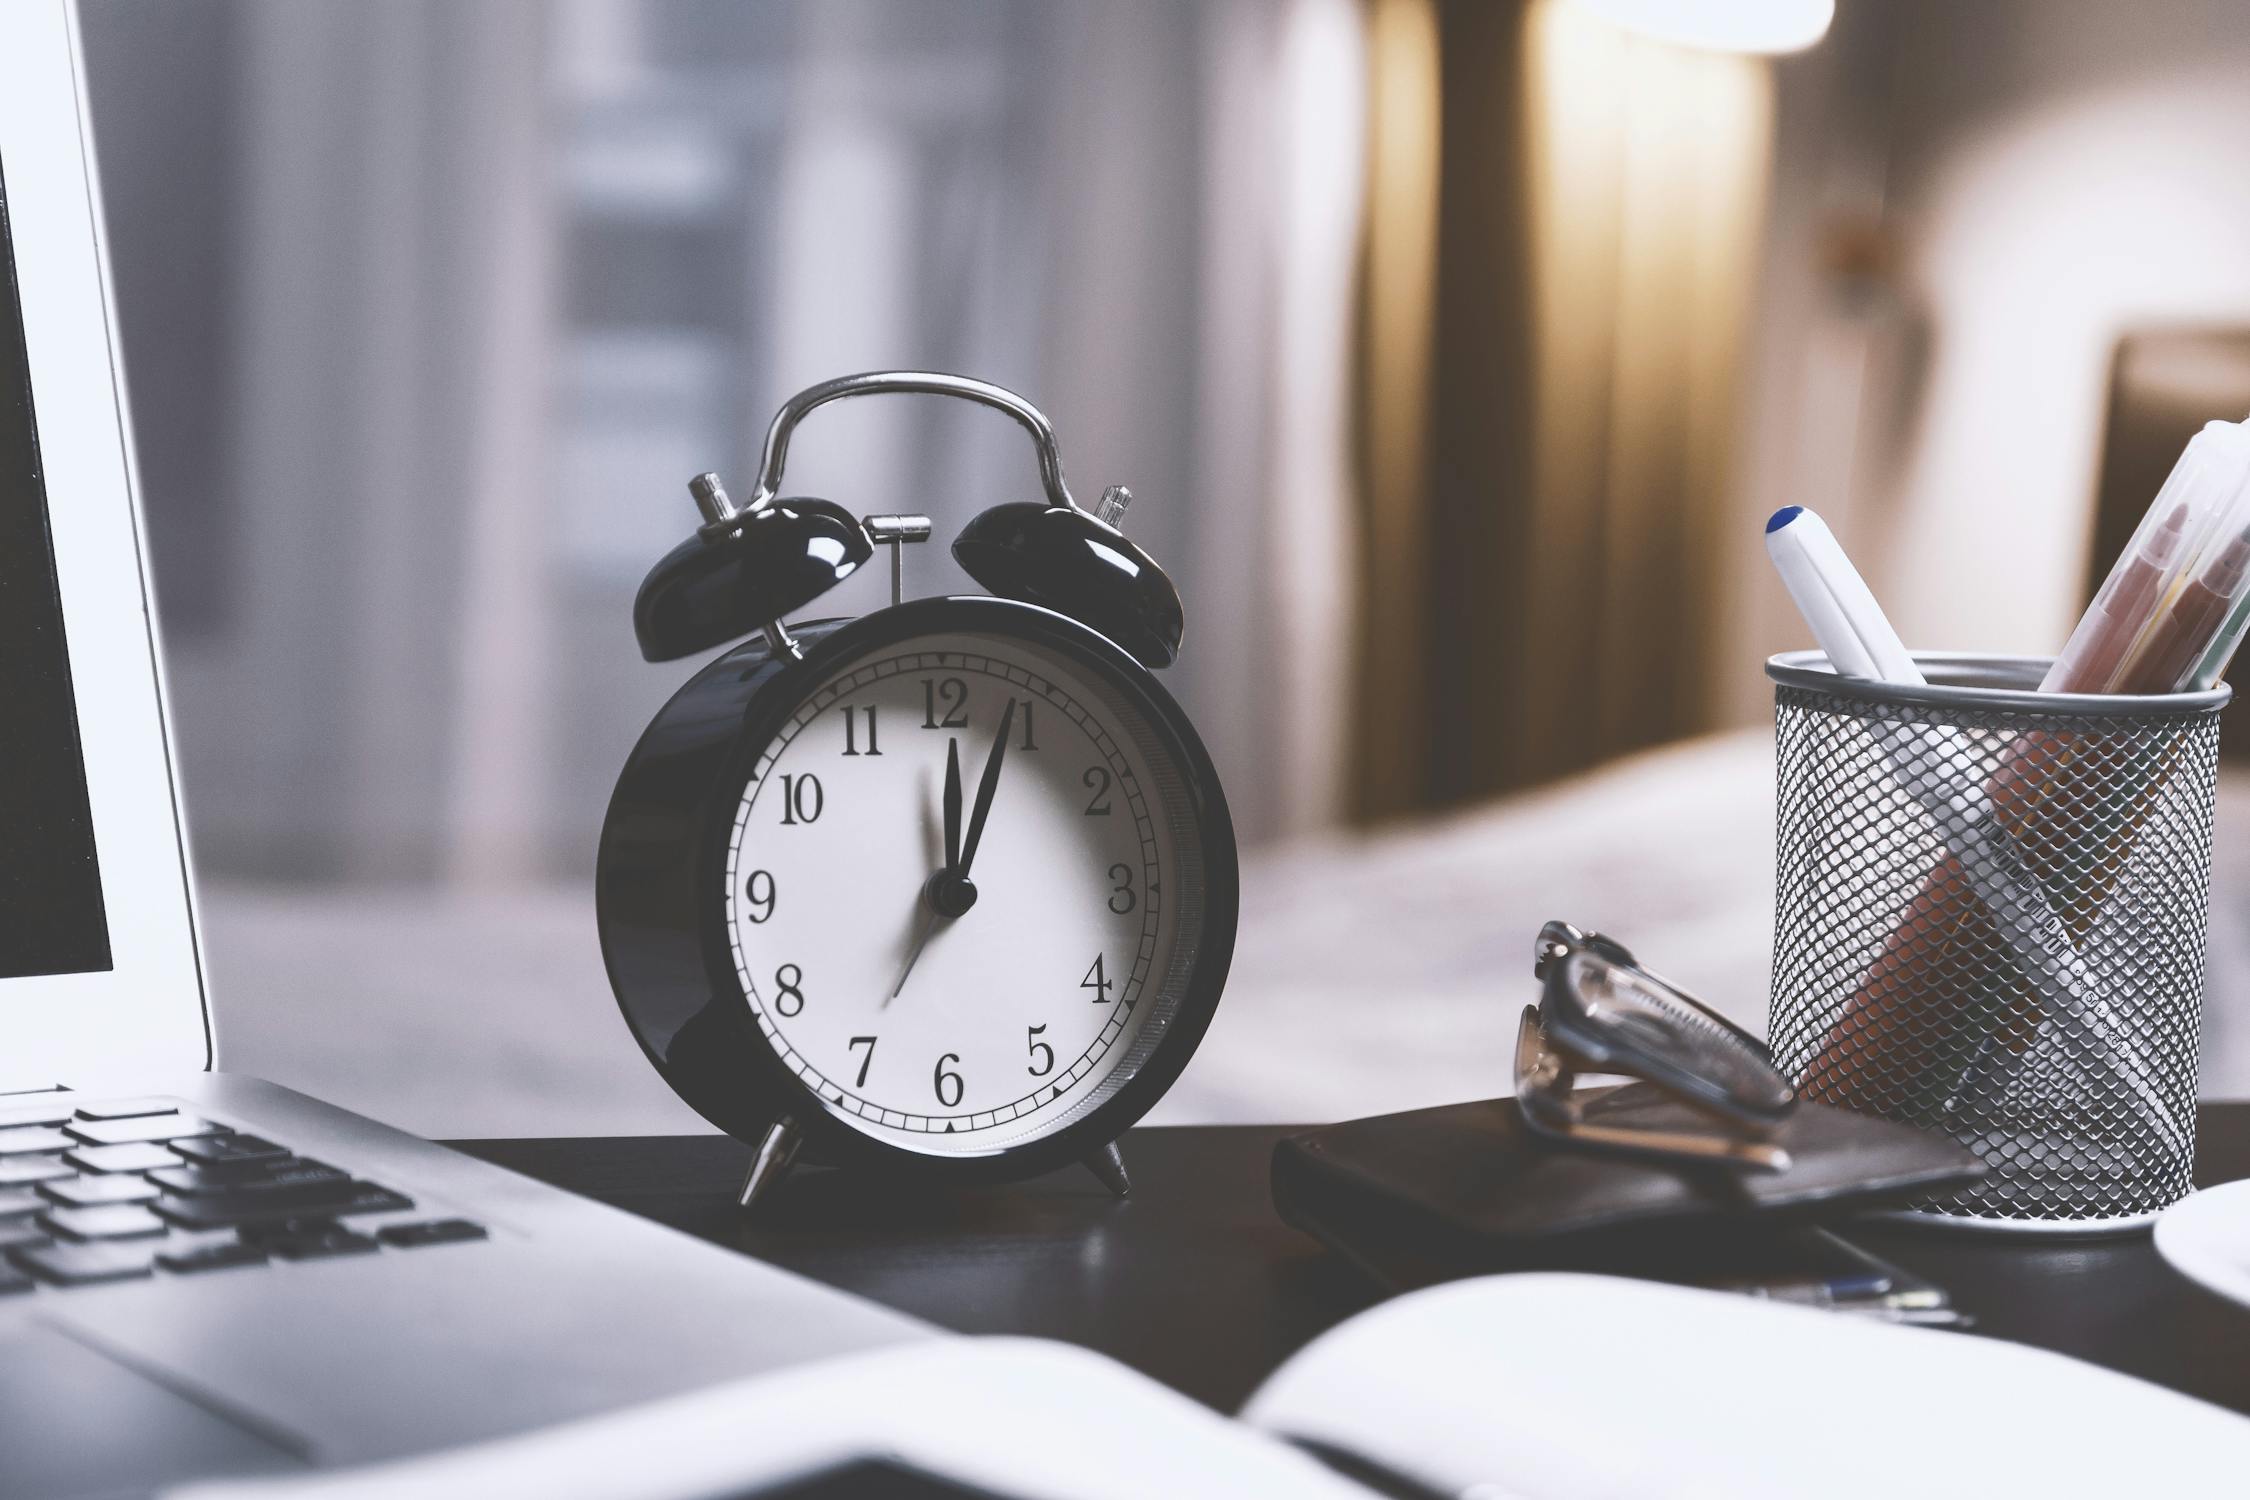 Time Management Photo by JESHOOTS.com from Pexels: https://www.pexels.com/photo/black-twin-bell-alarm-desk-clock-on-table-714701/